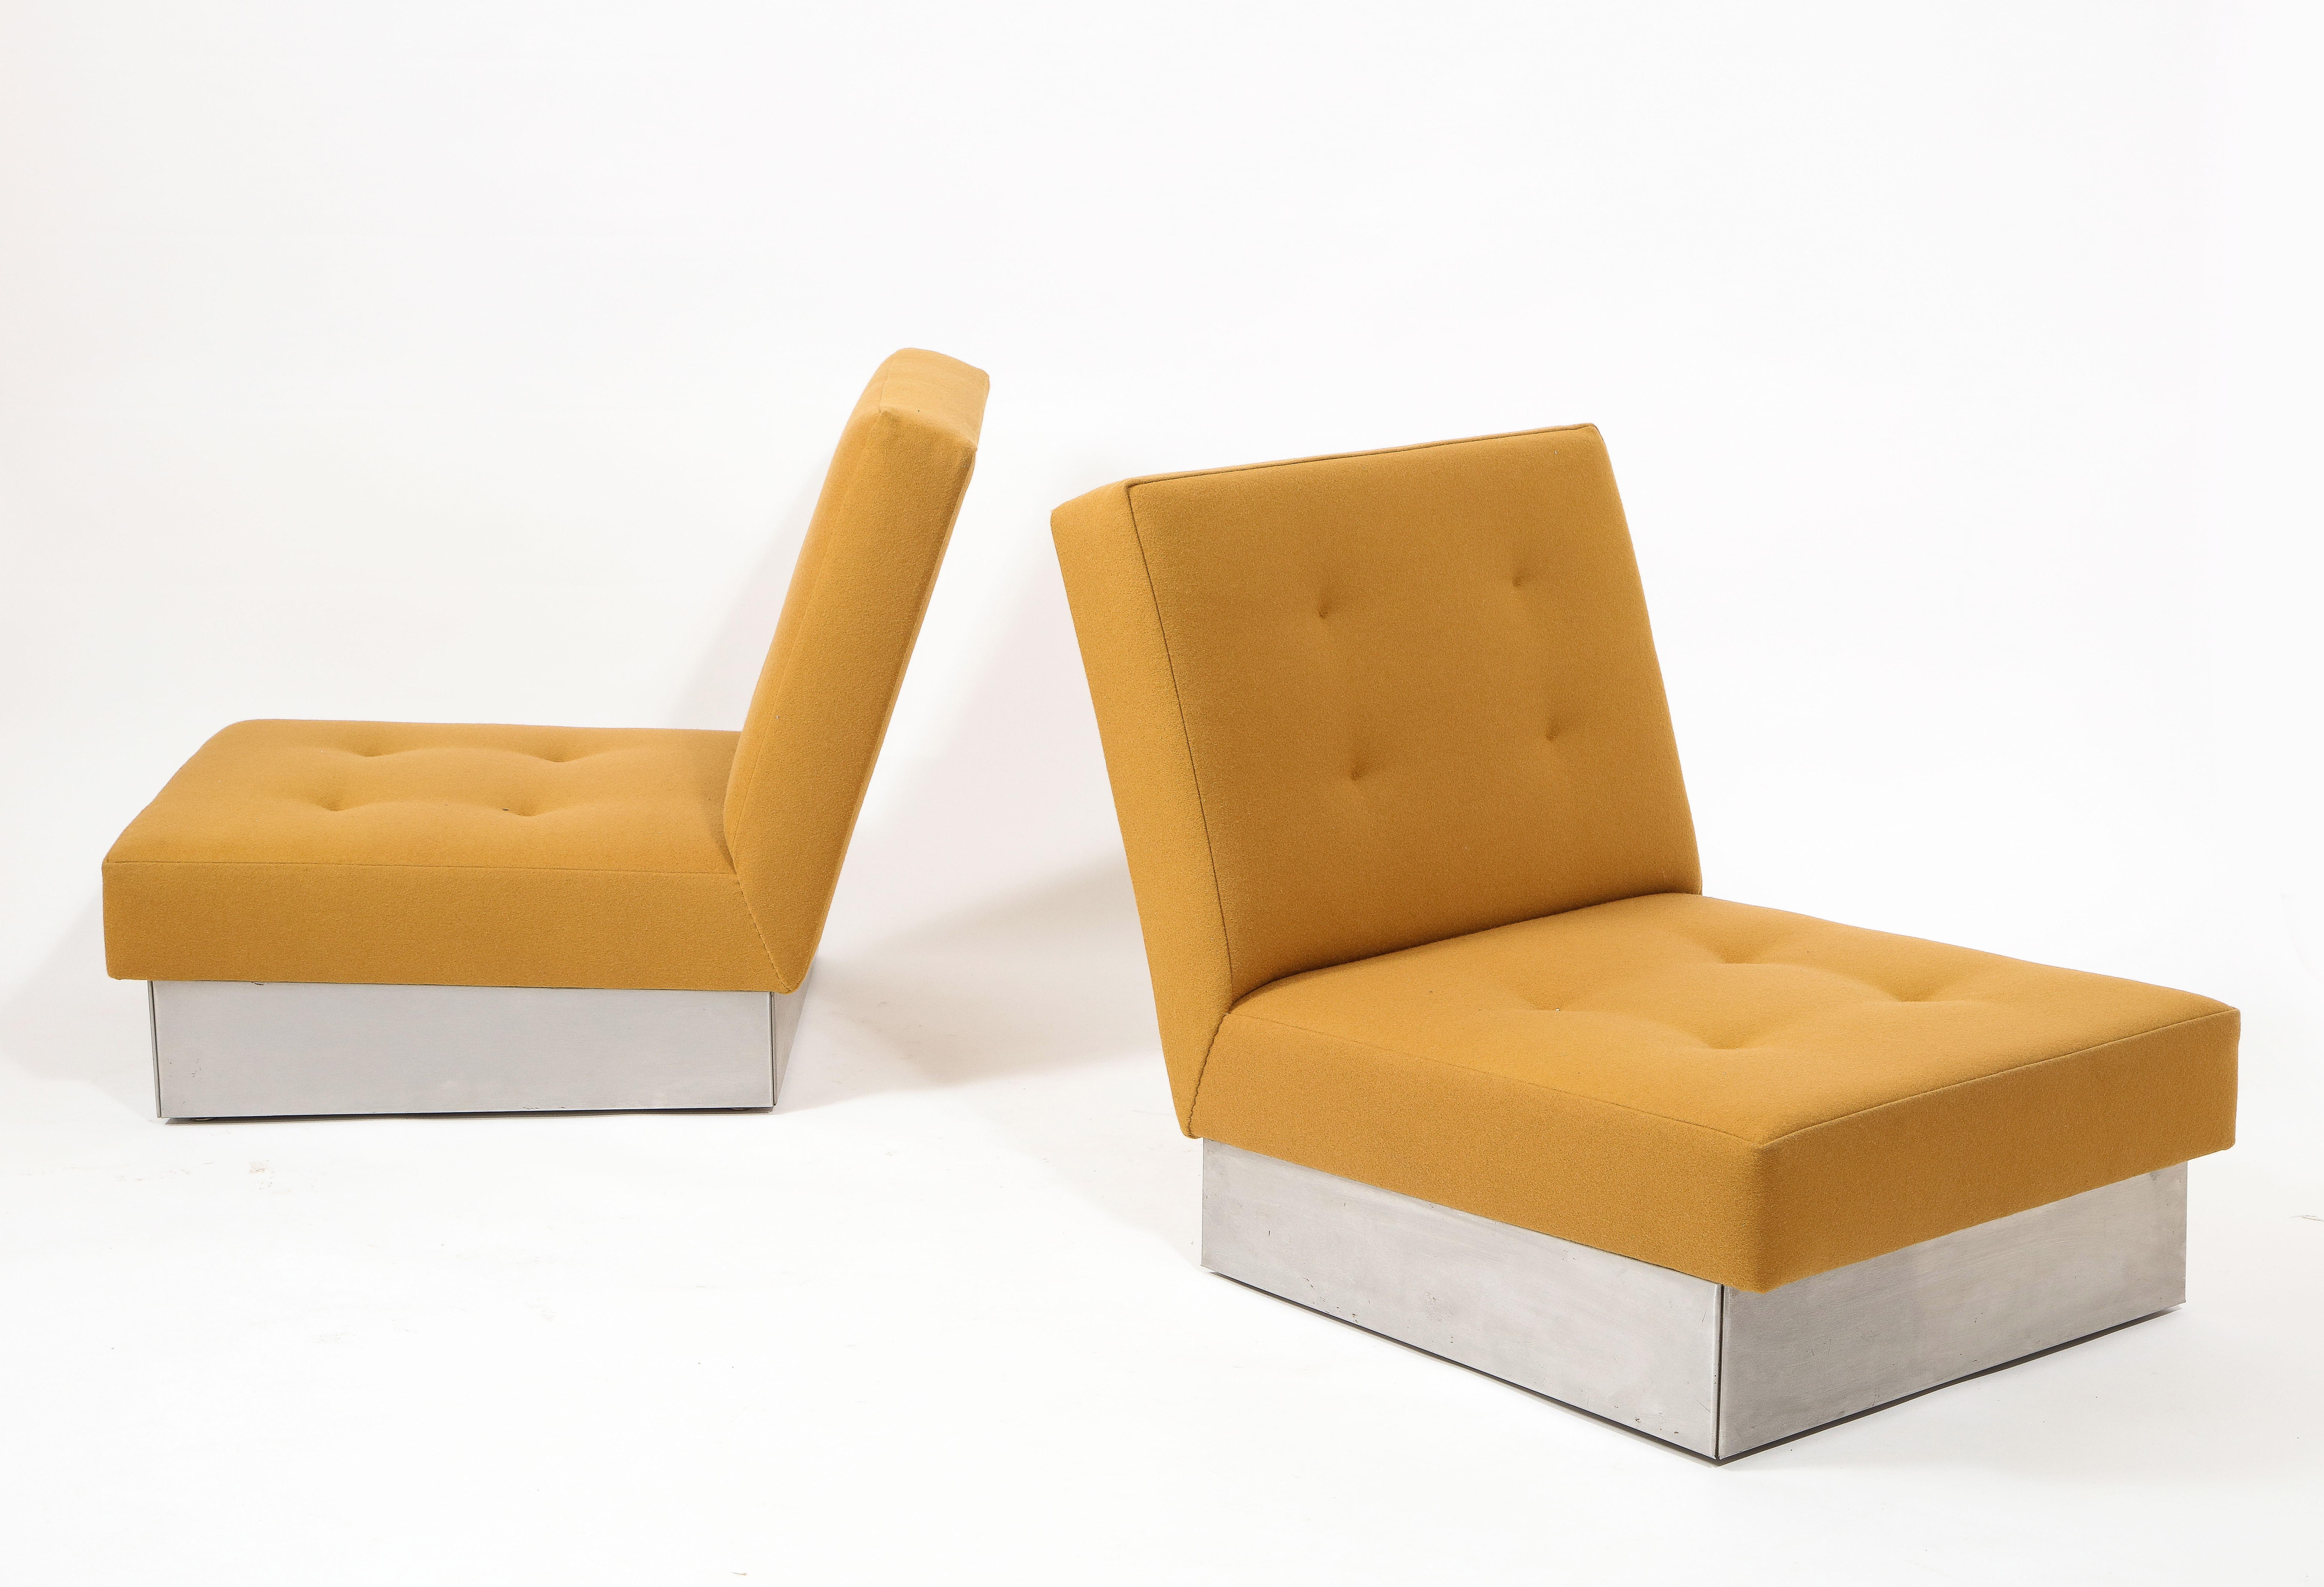 Jacques Charpentier Pair Modernist Slipper Chairs in Mohair, France 1970's For Sale 3